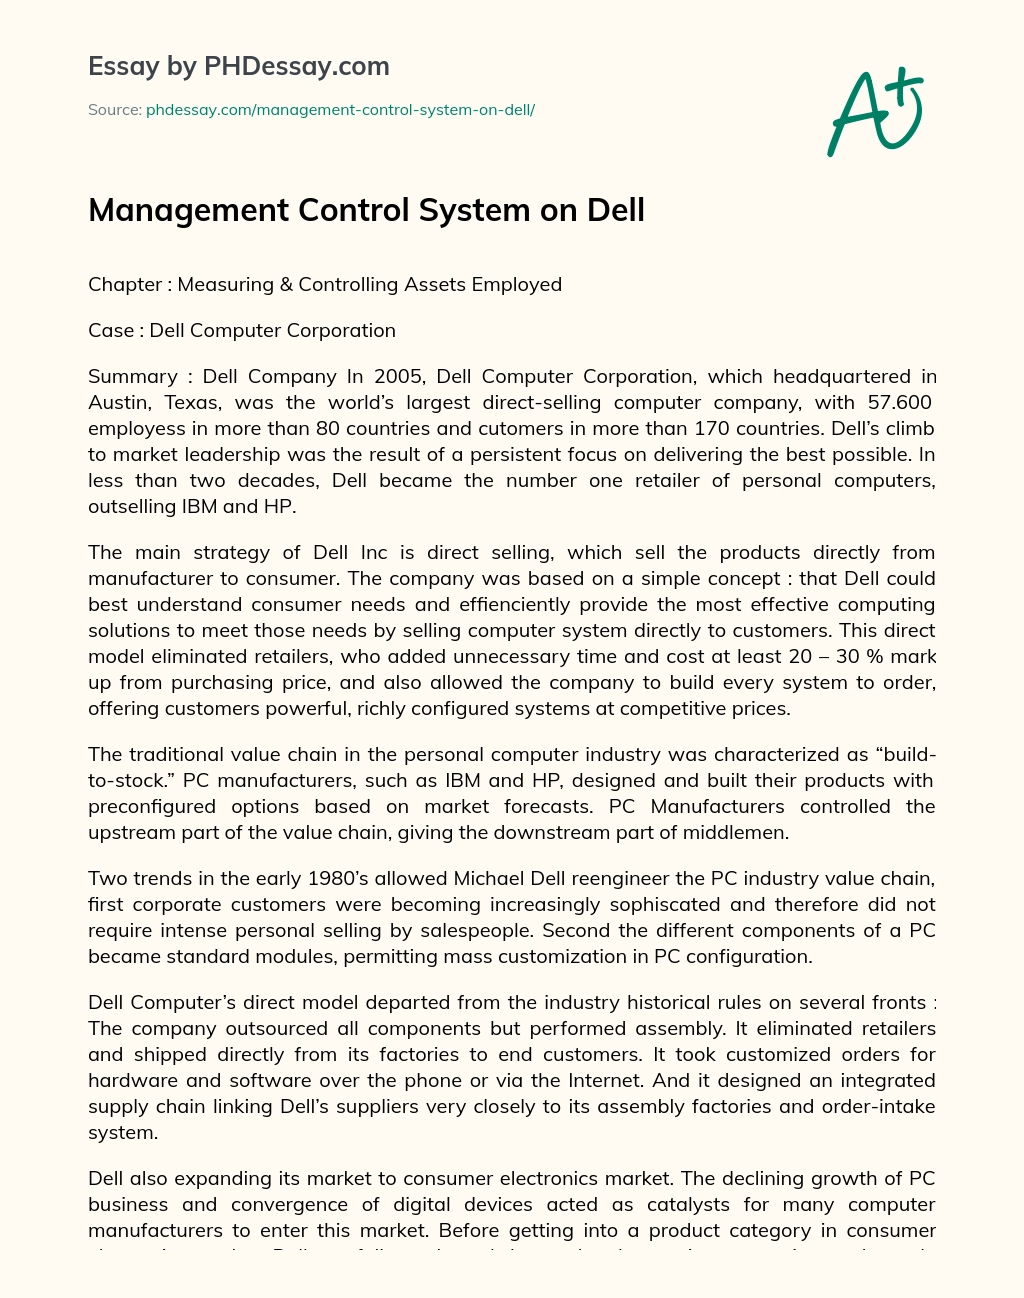 Management Control System on Dell essay